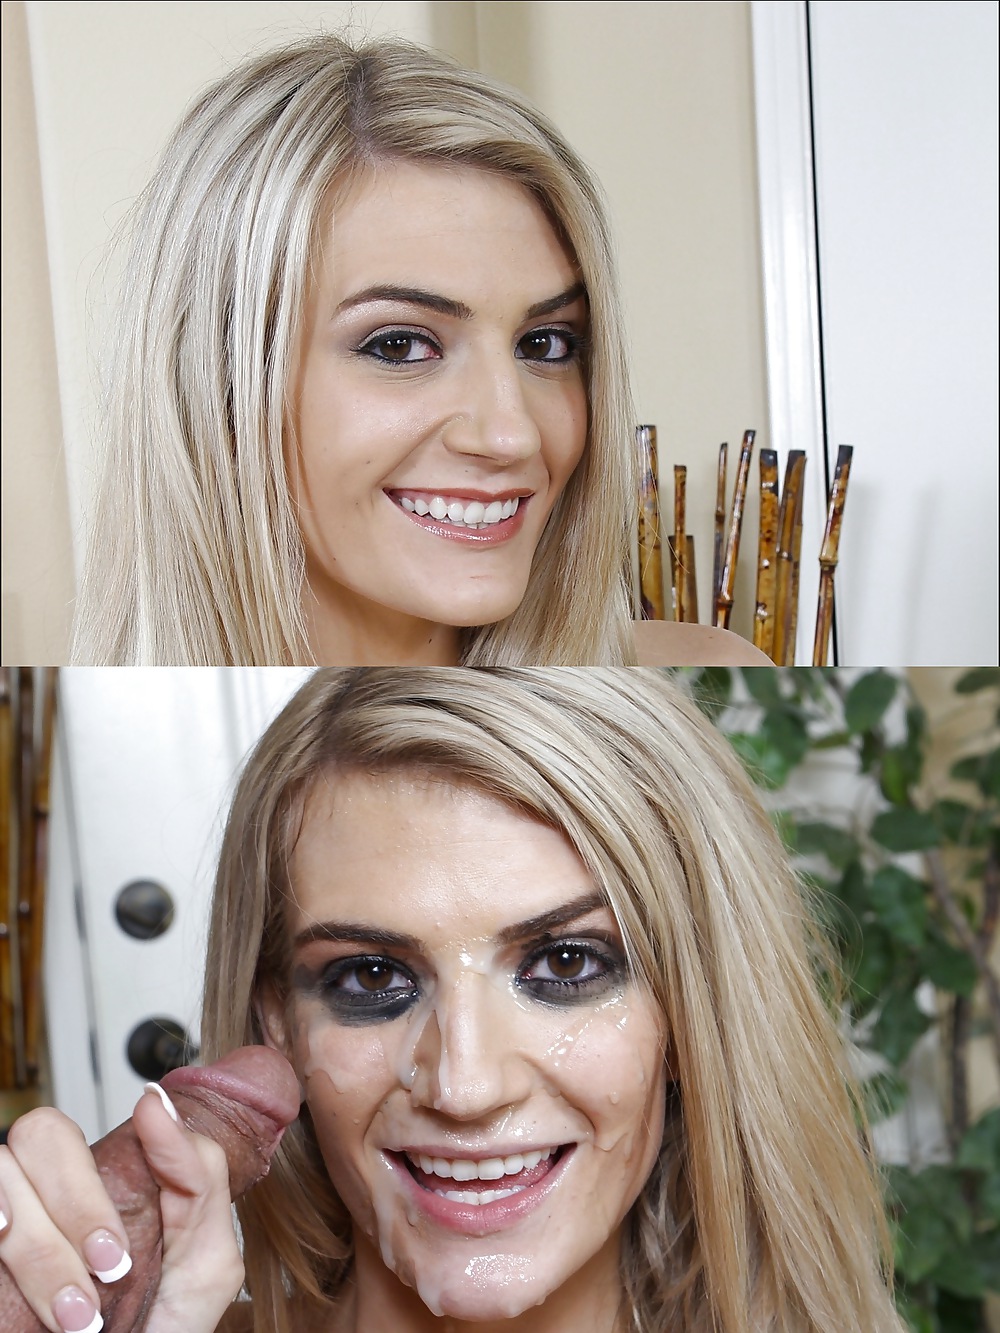 Before and After Facials 6 (Thumbs Up If You Like) #22623368